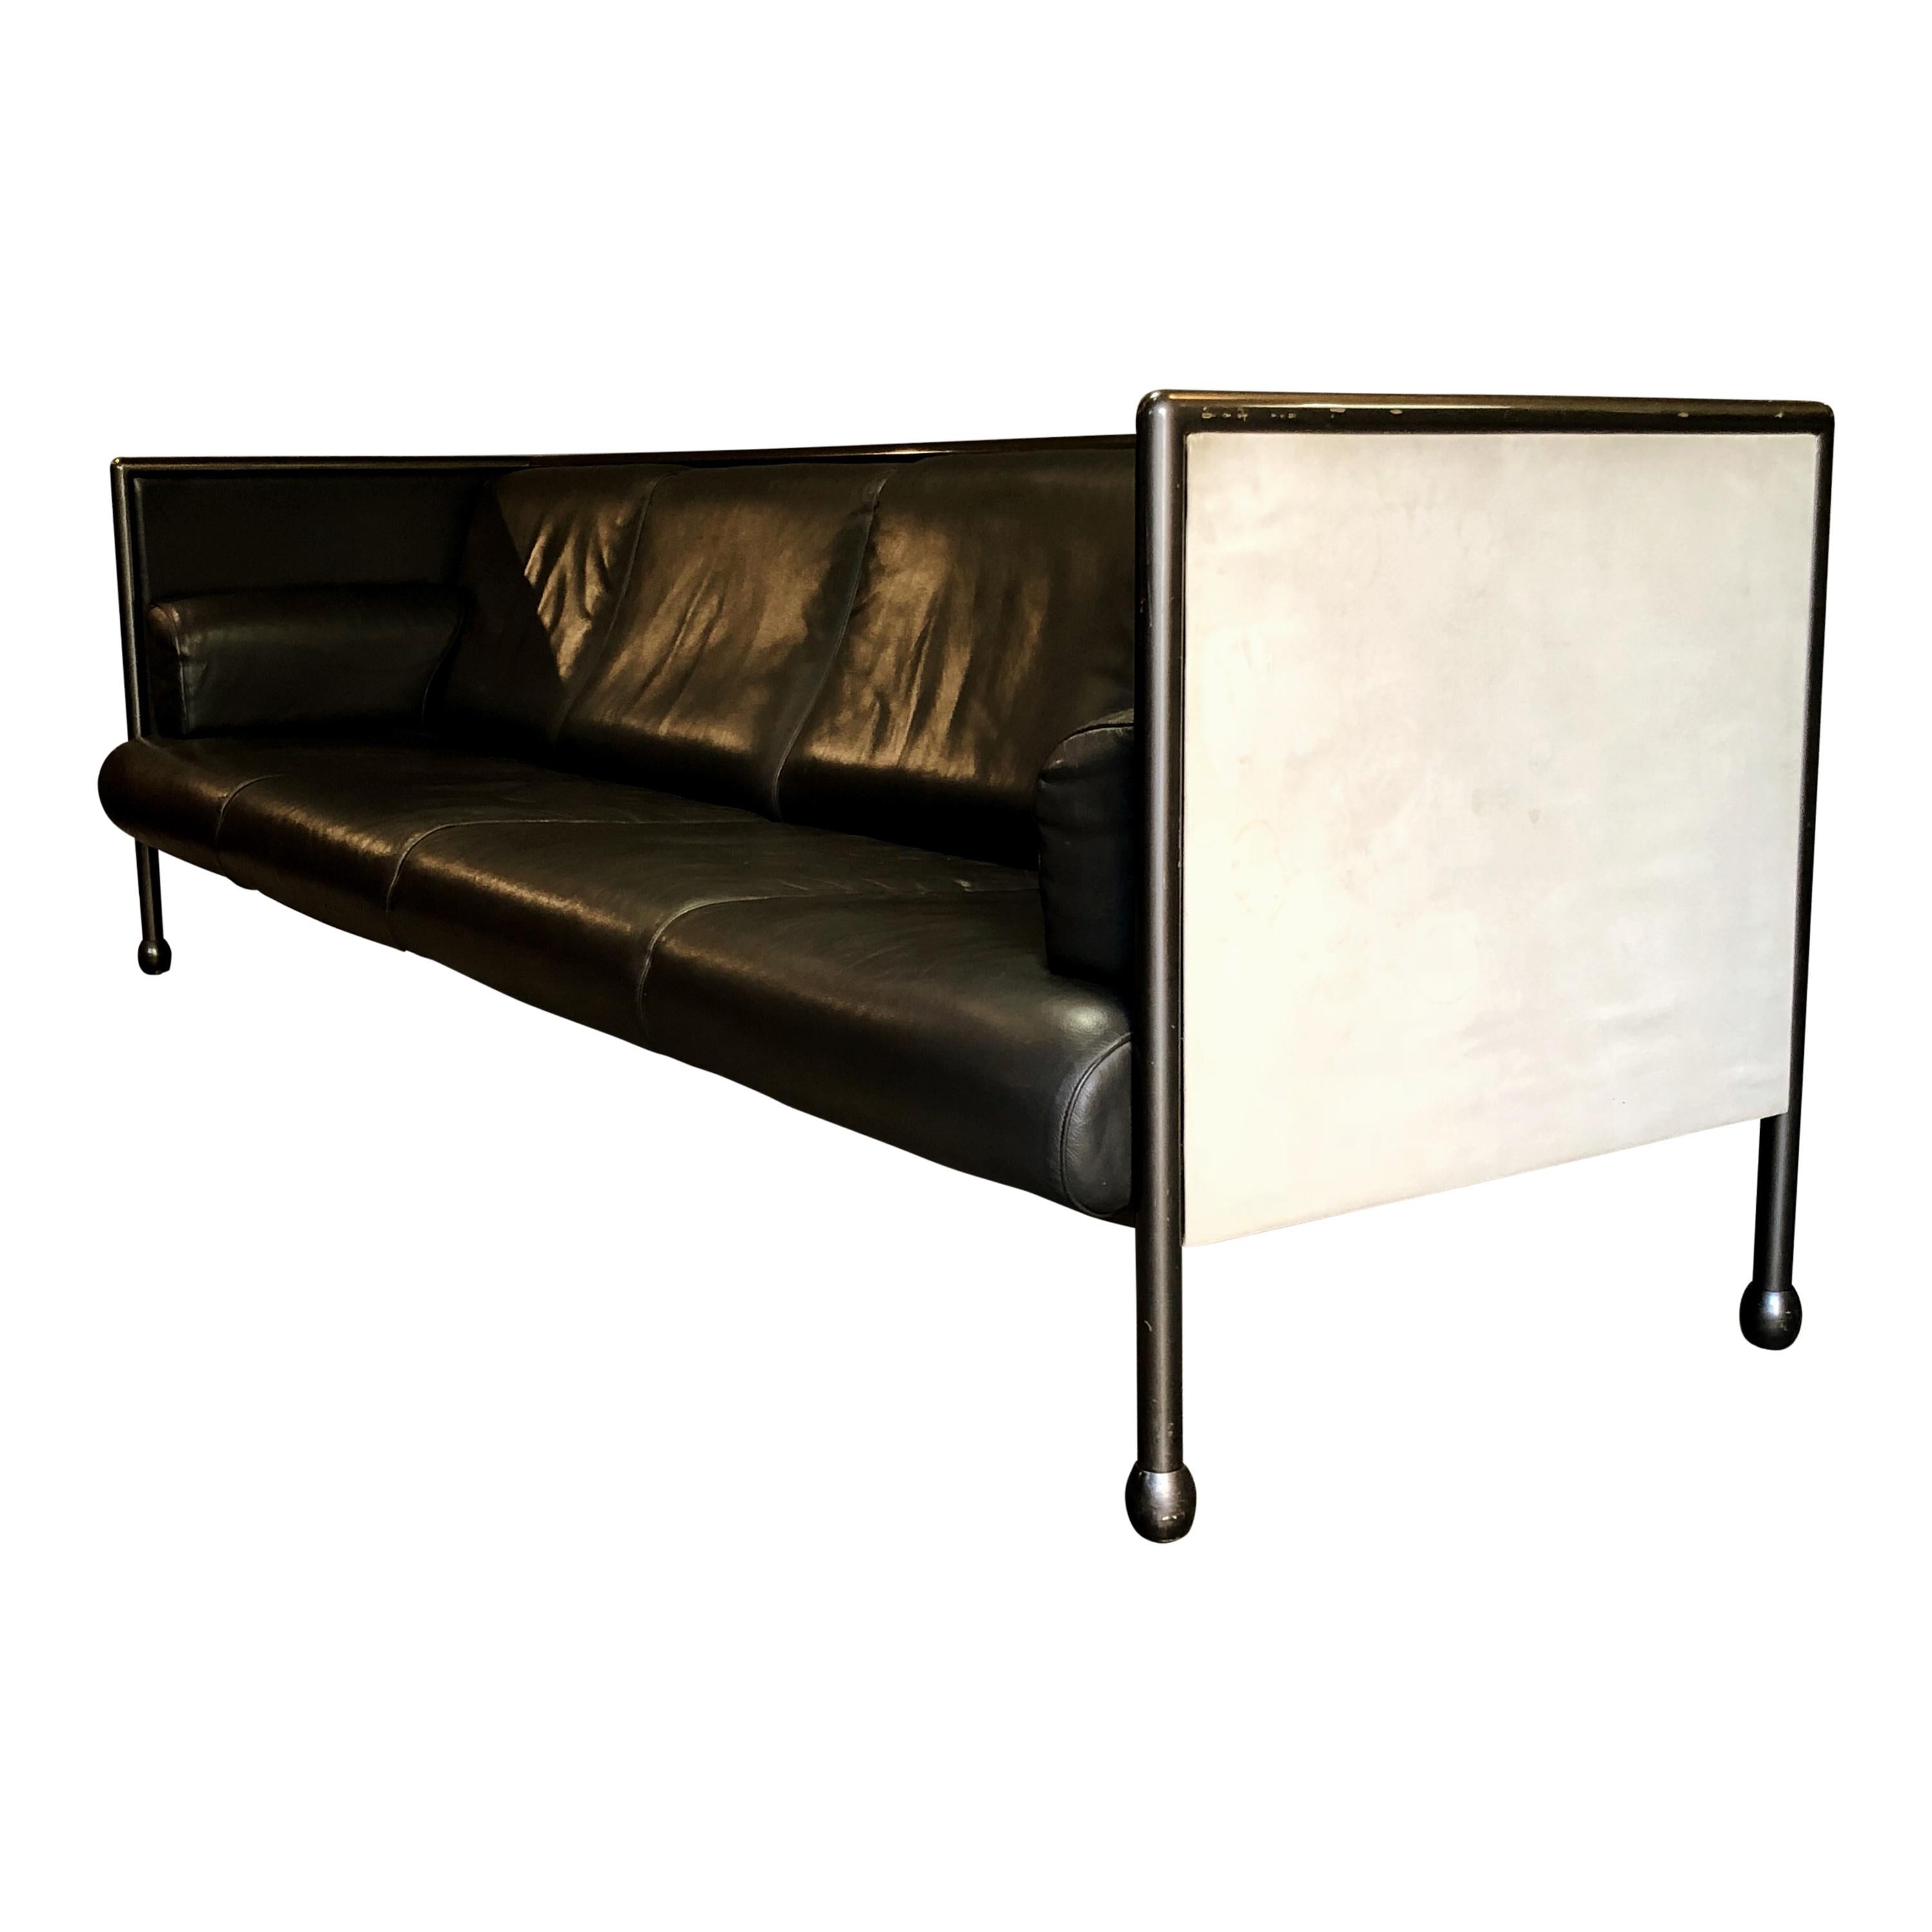 Aluminum Ettore Sottsass Postmodern Iron and Black Leather Danube Sofa for Cassina, 1992 For Sale